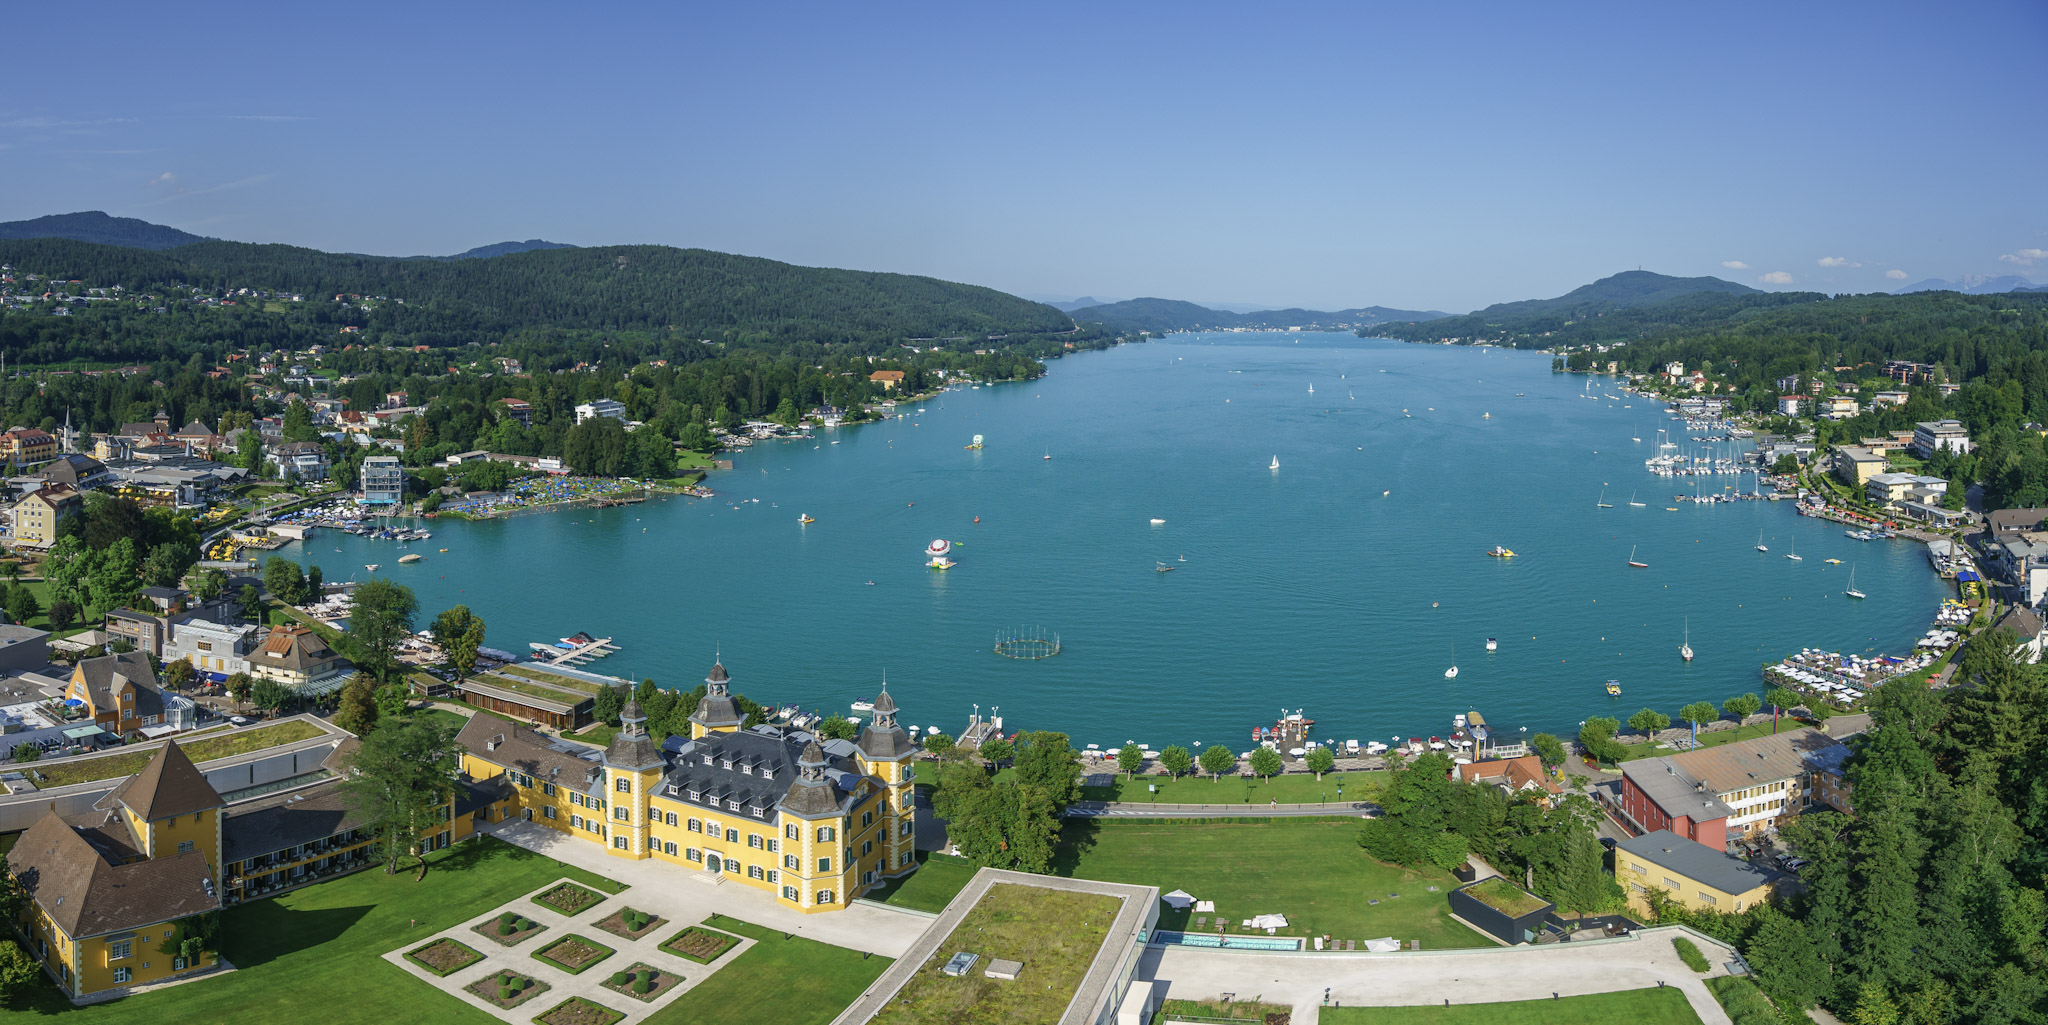 explore the metropolis of Velden am Wörthersee by bike